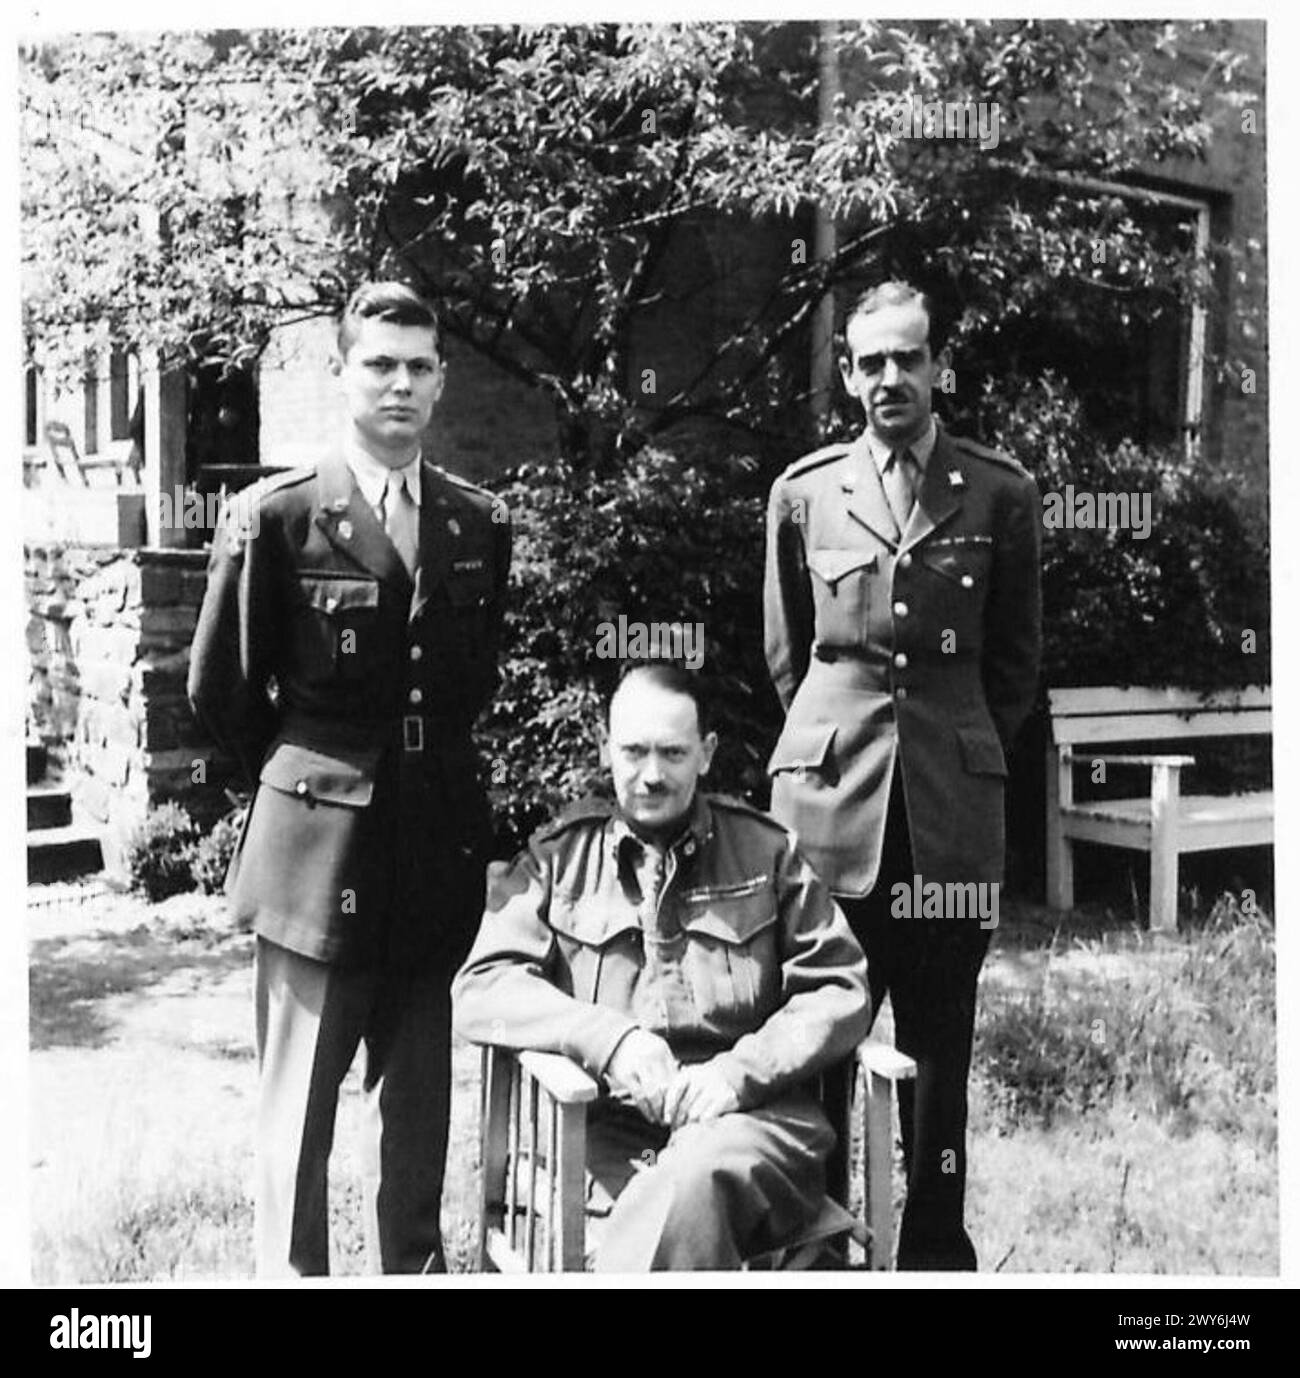 PICTURES OF MAJOR GENERAL SIR F.W. DE GUINGAND, KBE.,CB.,DSO., CHIEF OF STAFF TO 21 ARMY GROUP - The Chief of Staff with his A.D.C. and P.A. Left to right - Major E.R. Culvert, A.D.C. Major General Sir F.W. de Guingand, and Major W.F.Bovill, P.A. , British Army, 21st Army Group Stock Photo